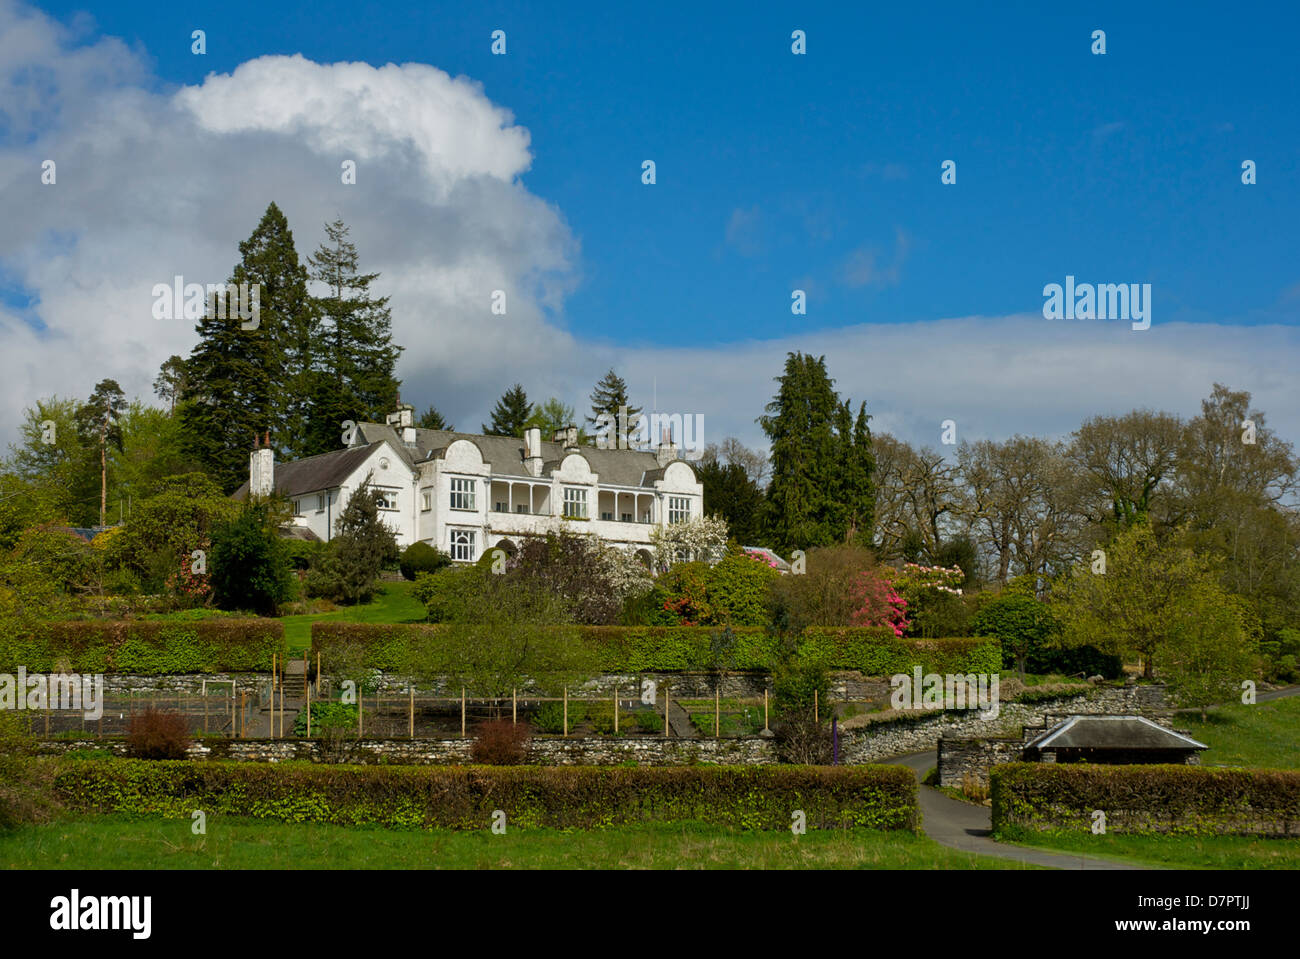 Brockhole, the visitor centre for the Lake District National Park, on the shores of Lake Windermere, Cumbria, England UK Stock Photo